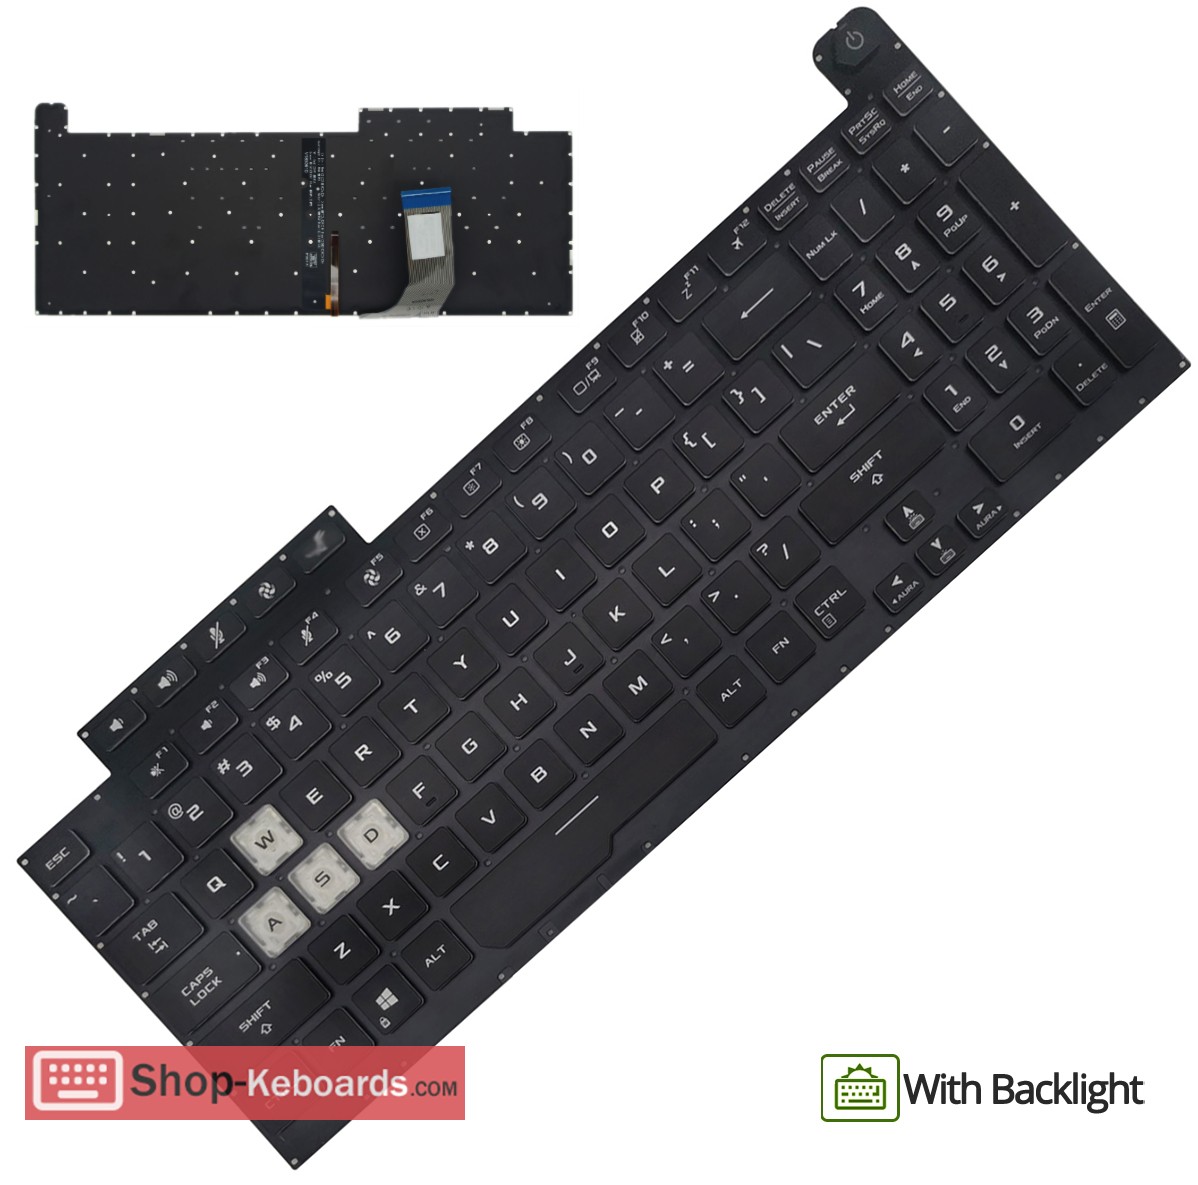 Asus rog-g731gt-au093t-AU093T  Keyboard replacement